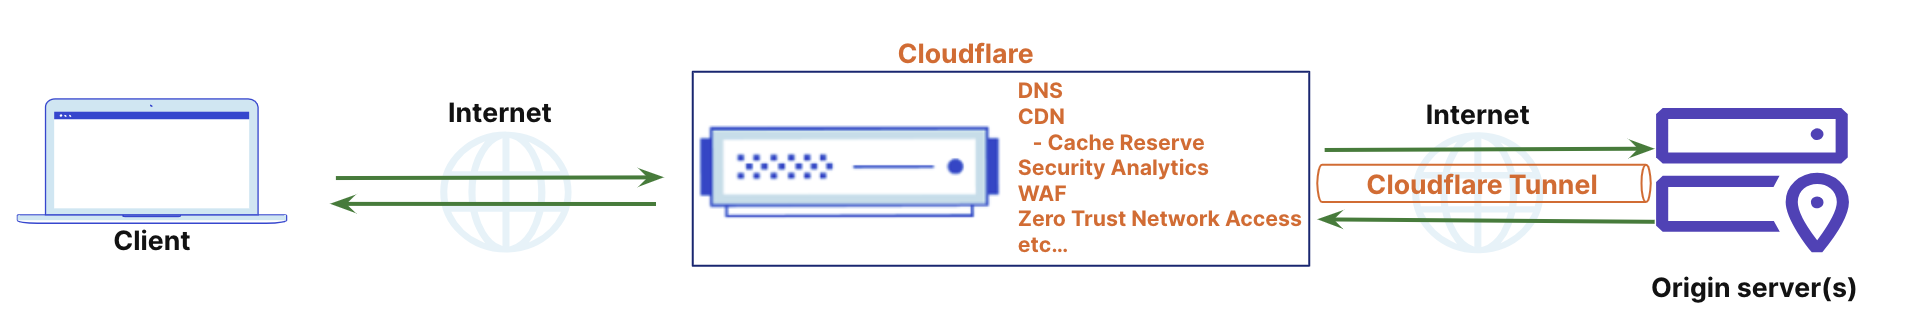 Cloudflare behaves as a proxy where traffic is directed and performance and security services applied.